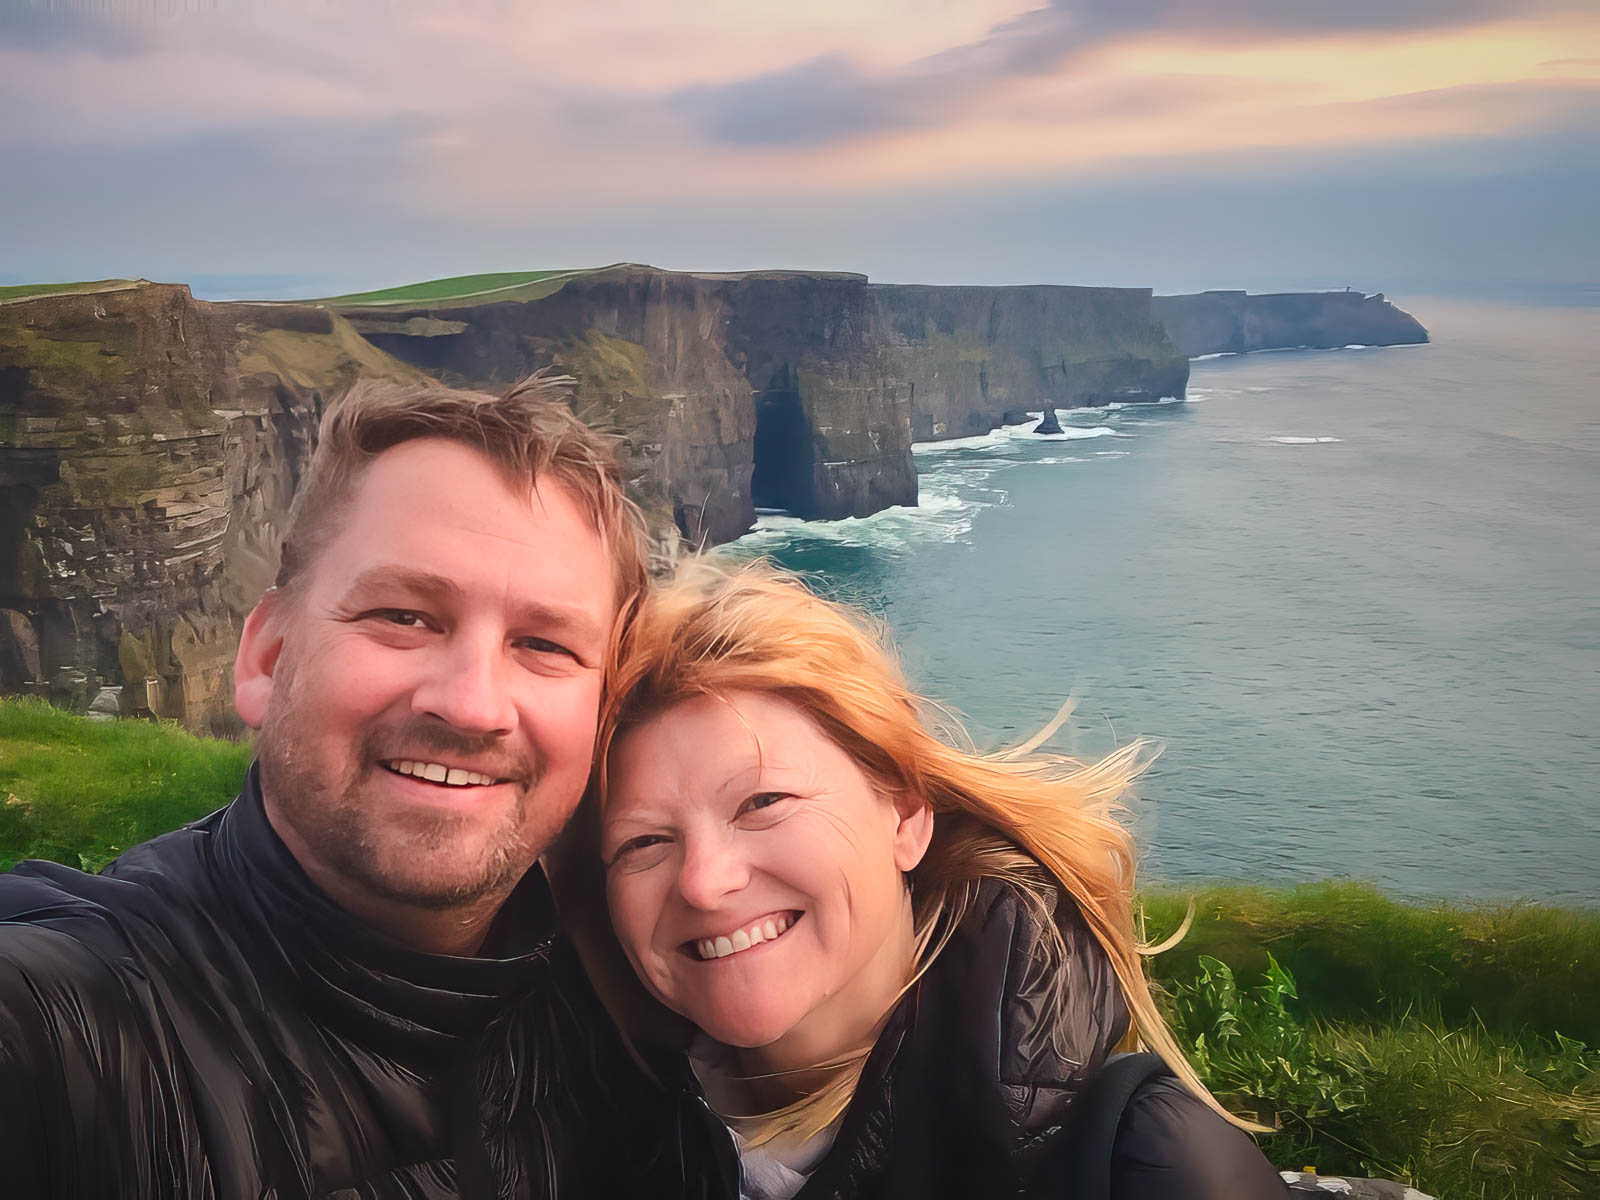 Visiting the Cliffs of Moher